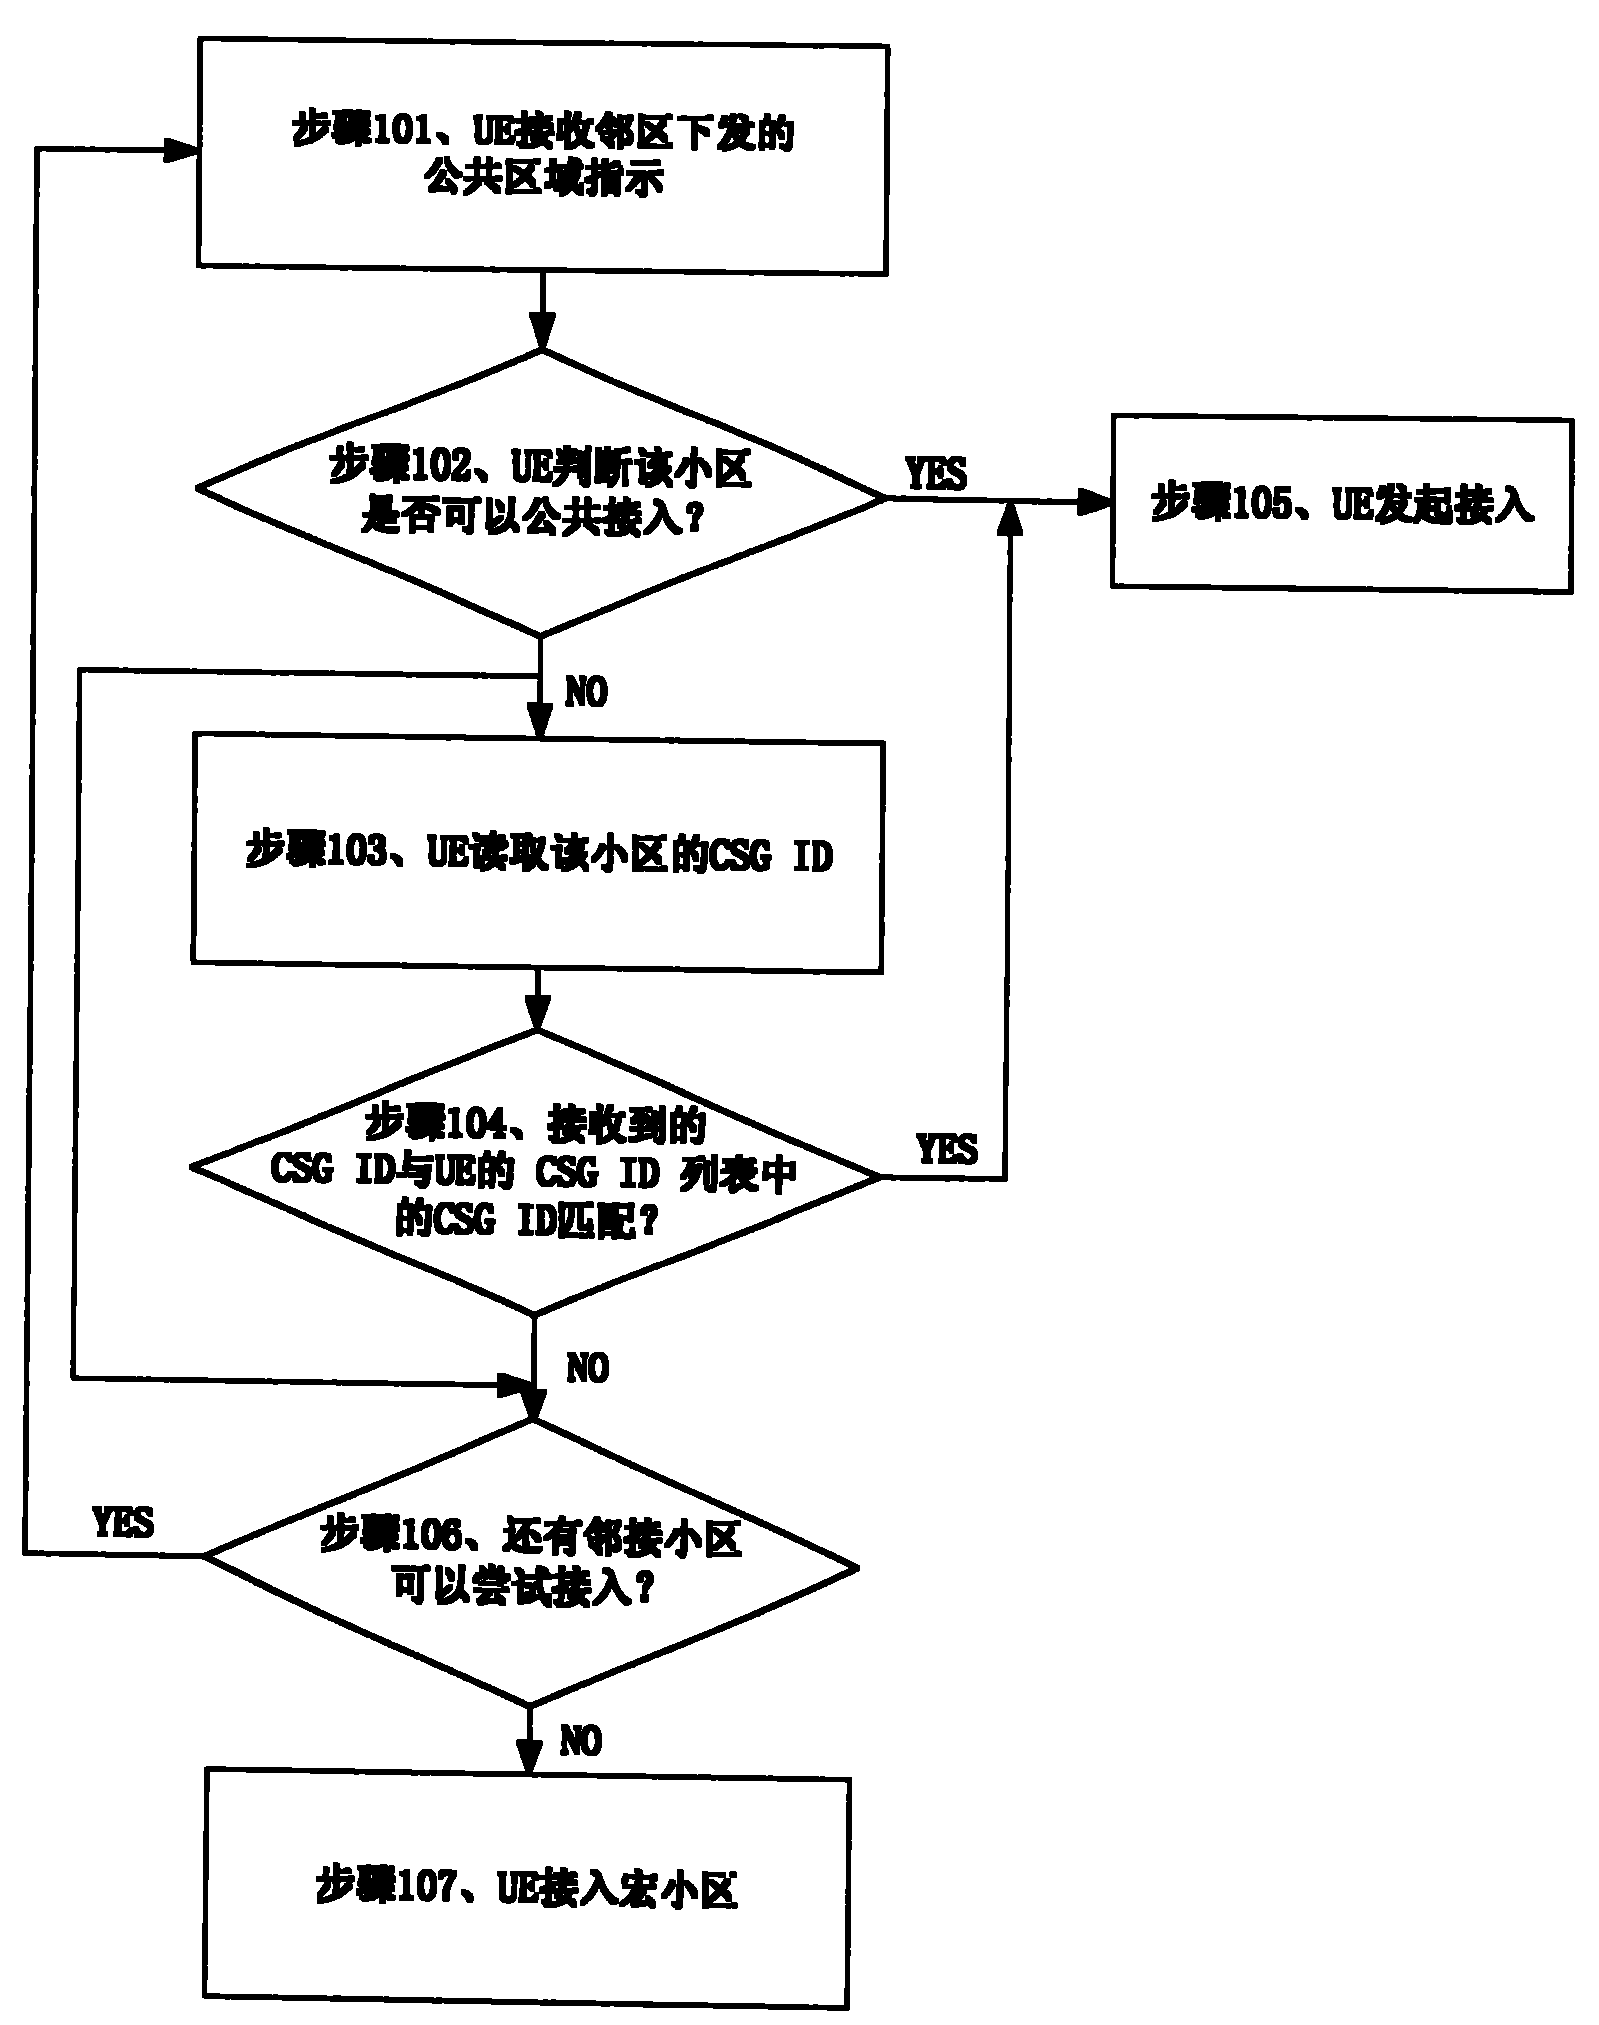 Method for accessing wireless network